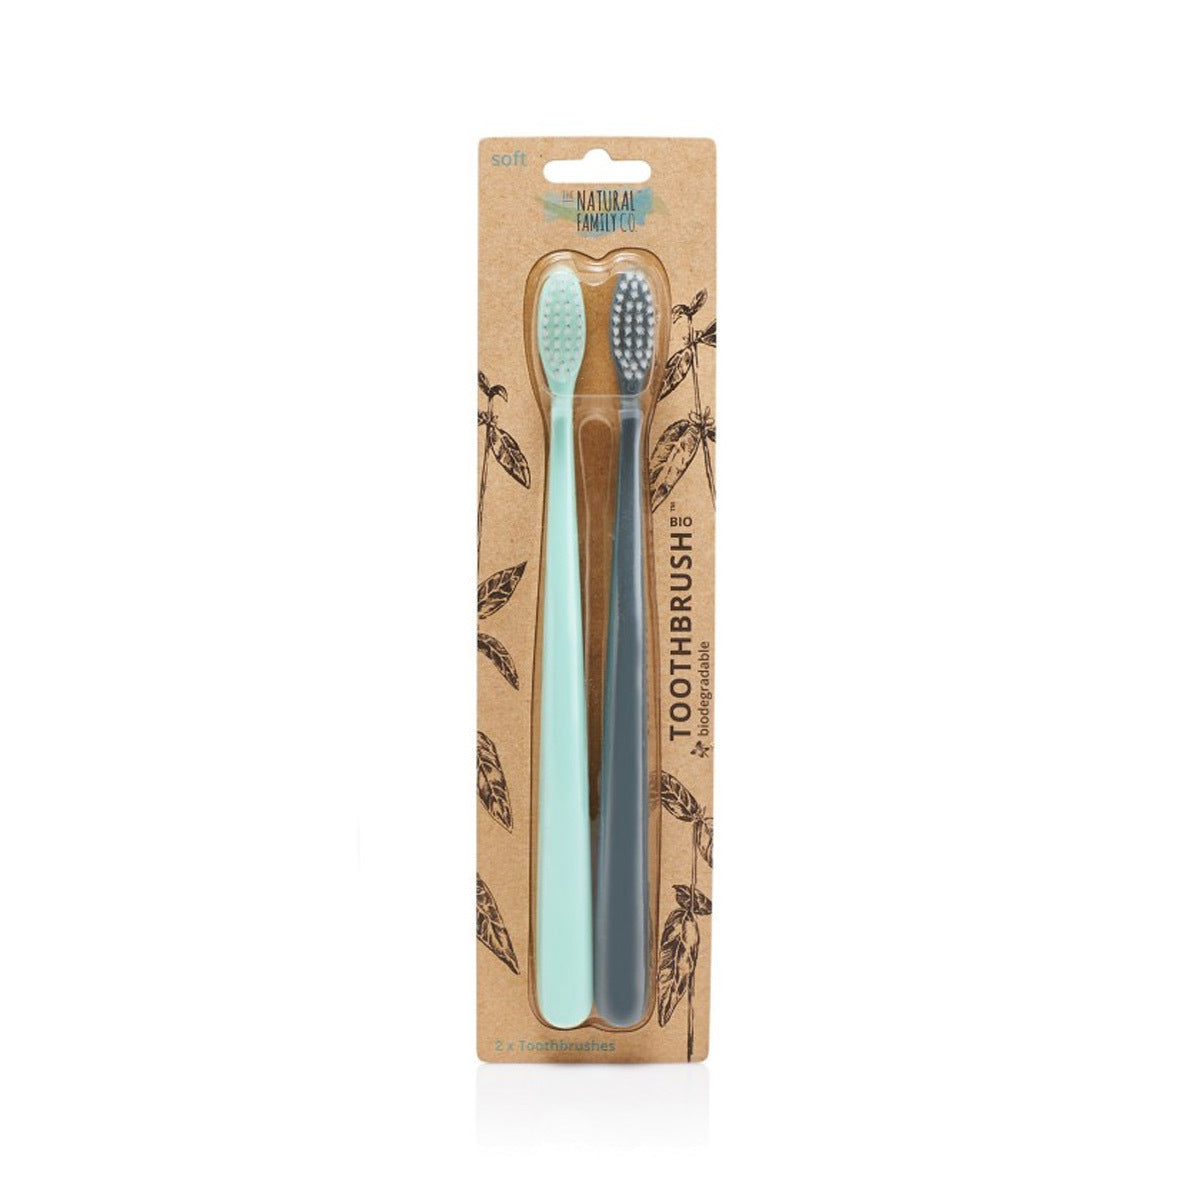 Primary image of Bio Toothbrish Duo - Rivermint + Monsoon Mint